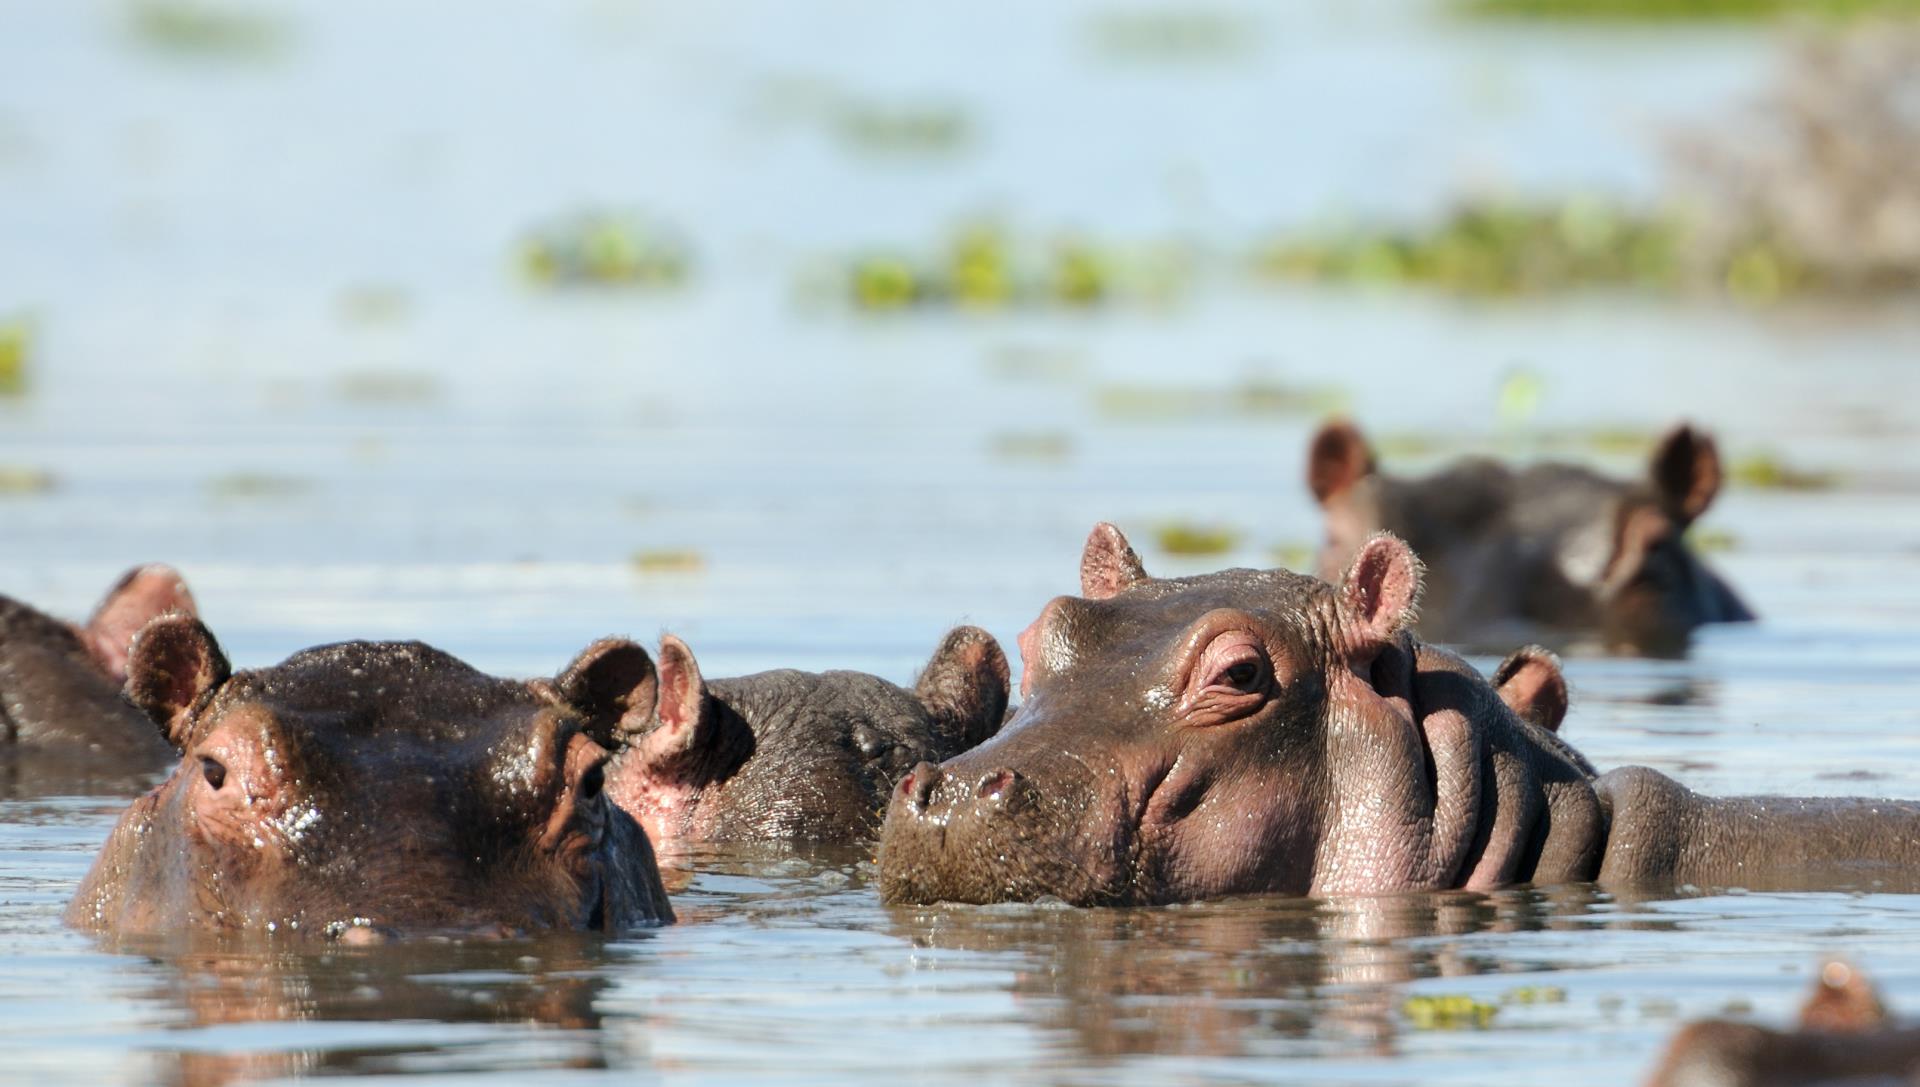 Hippos watching - Highlights of East Africa